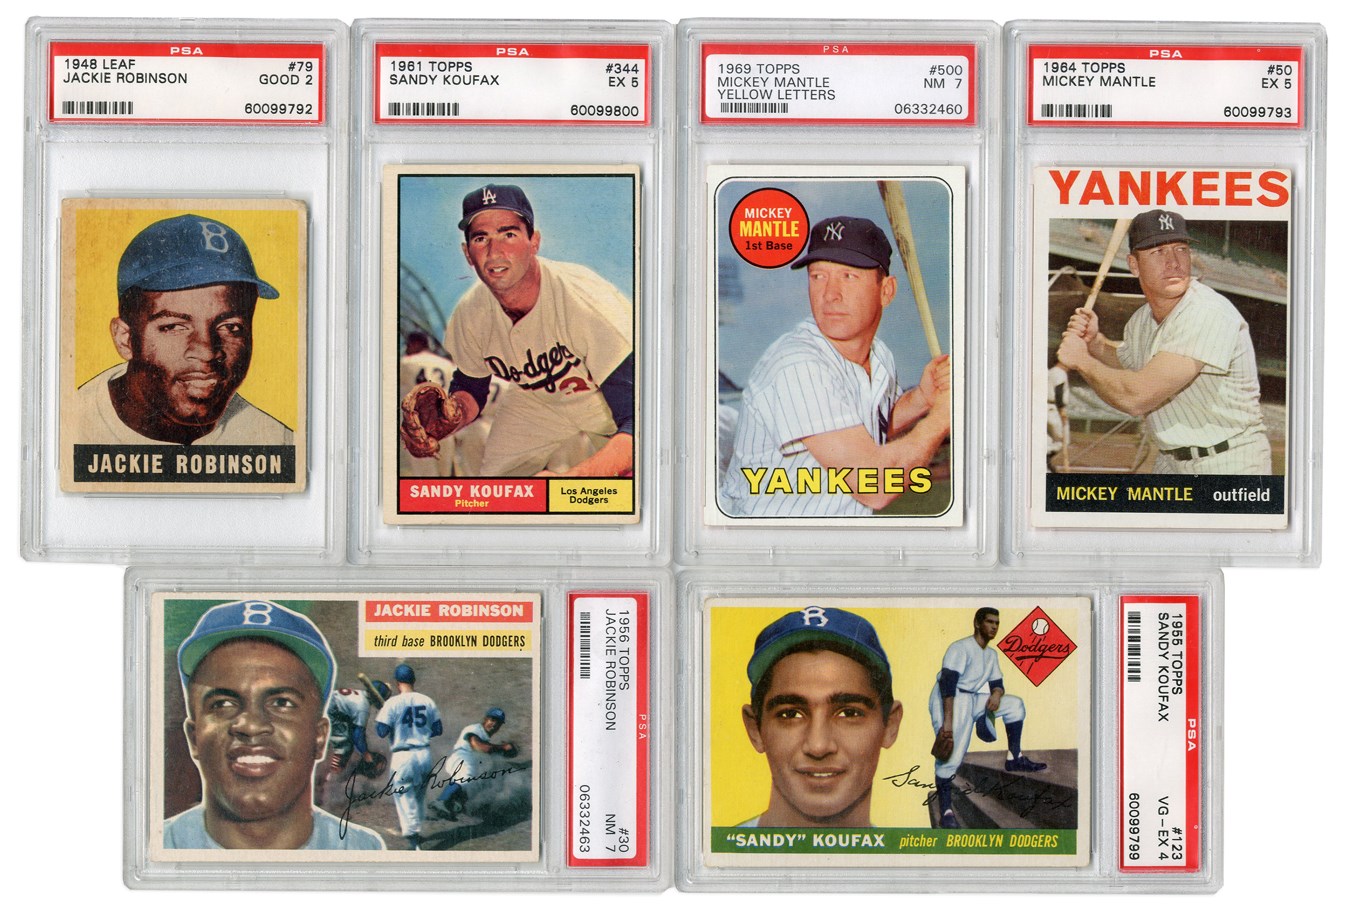 Baseball and Trading Cards - 1948-1976 Topps and Others PSA Graded Hall Famer Collection with Sandy Koufax Rookie and Signed Joe DiMaggio Card (16)